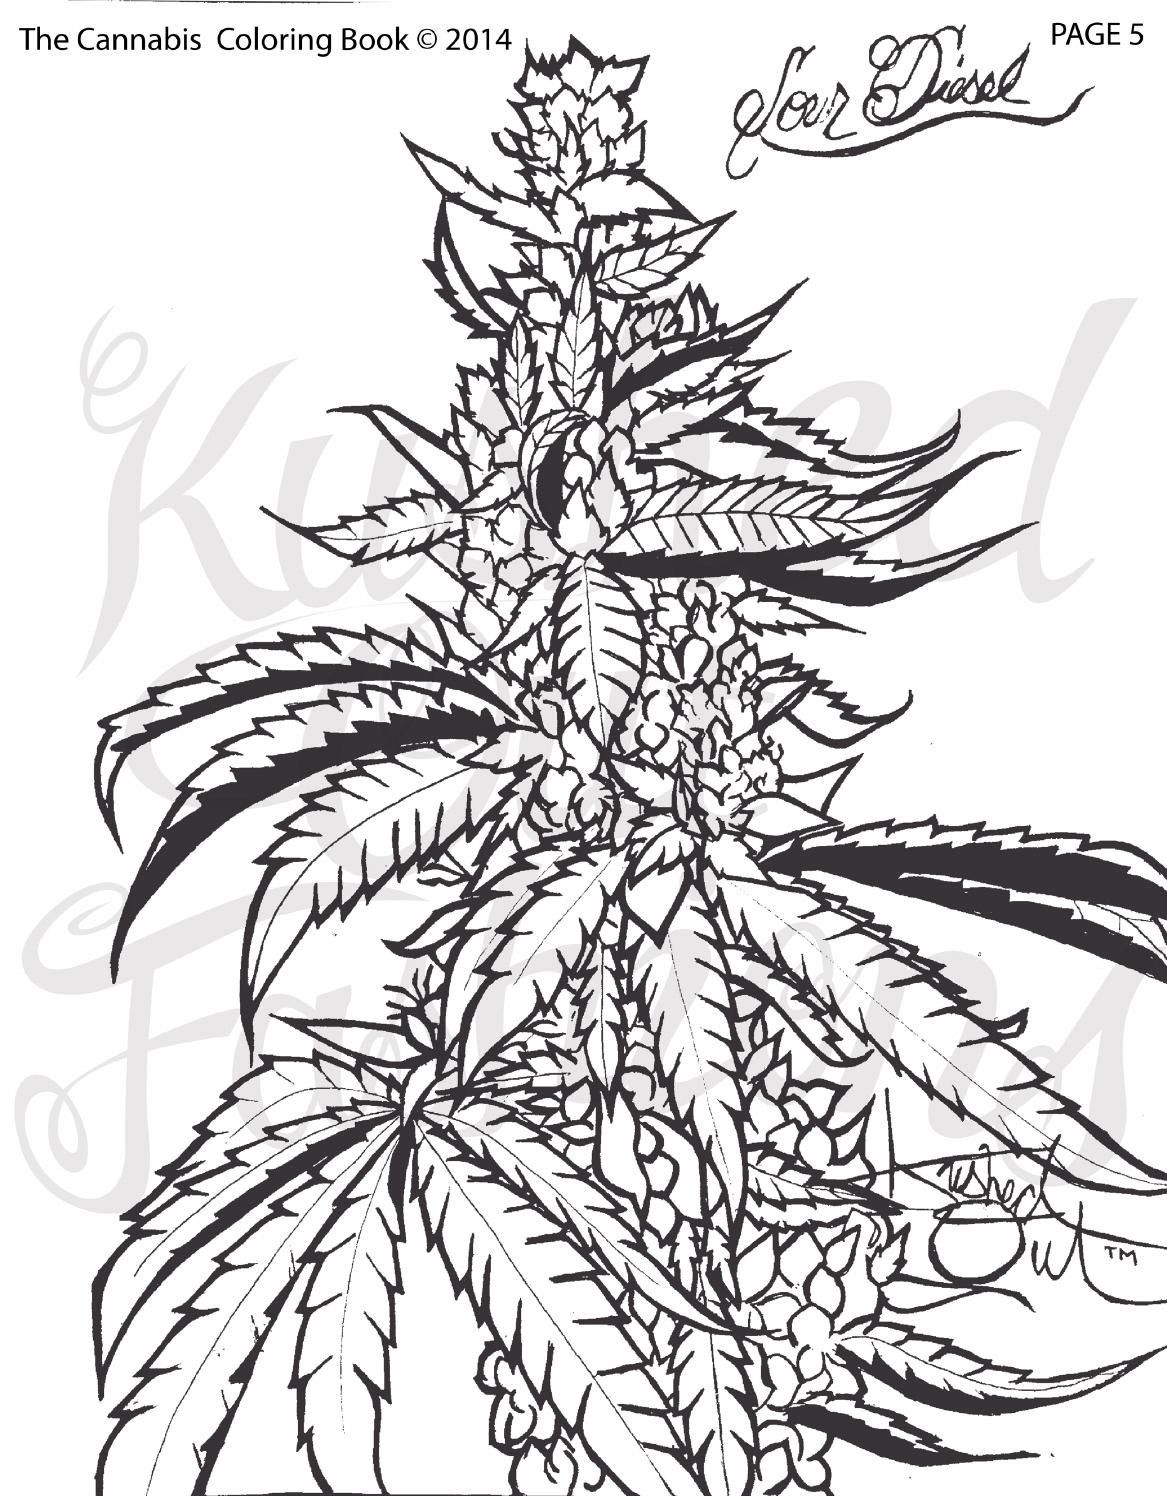 Marijuana Coloring Book
 The Cannabis Coloring Book Vol 1 Issue 1